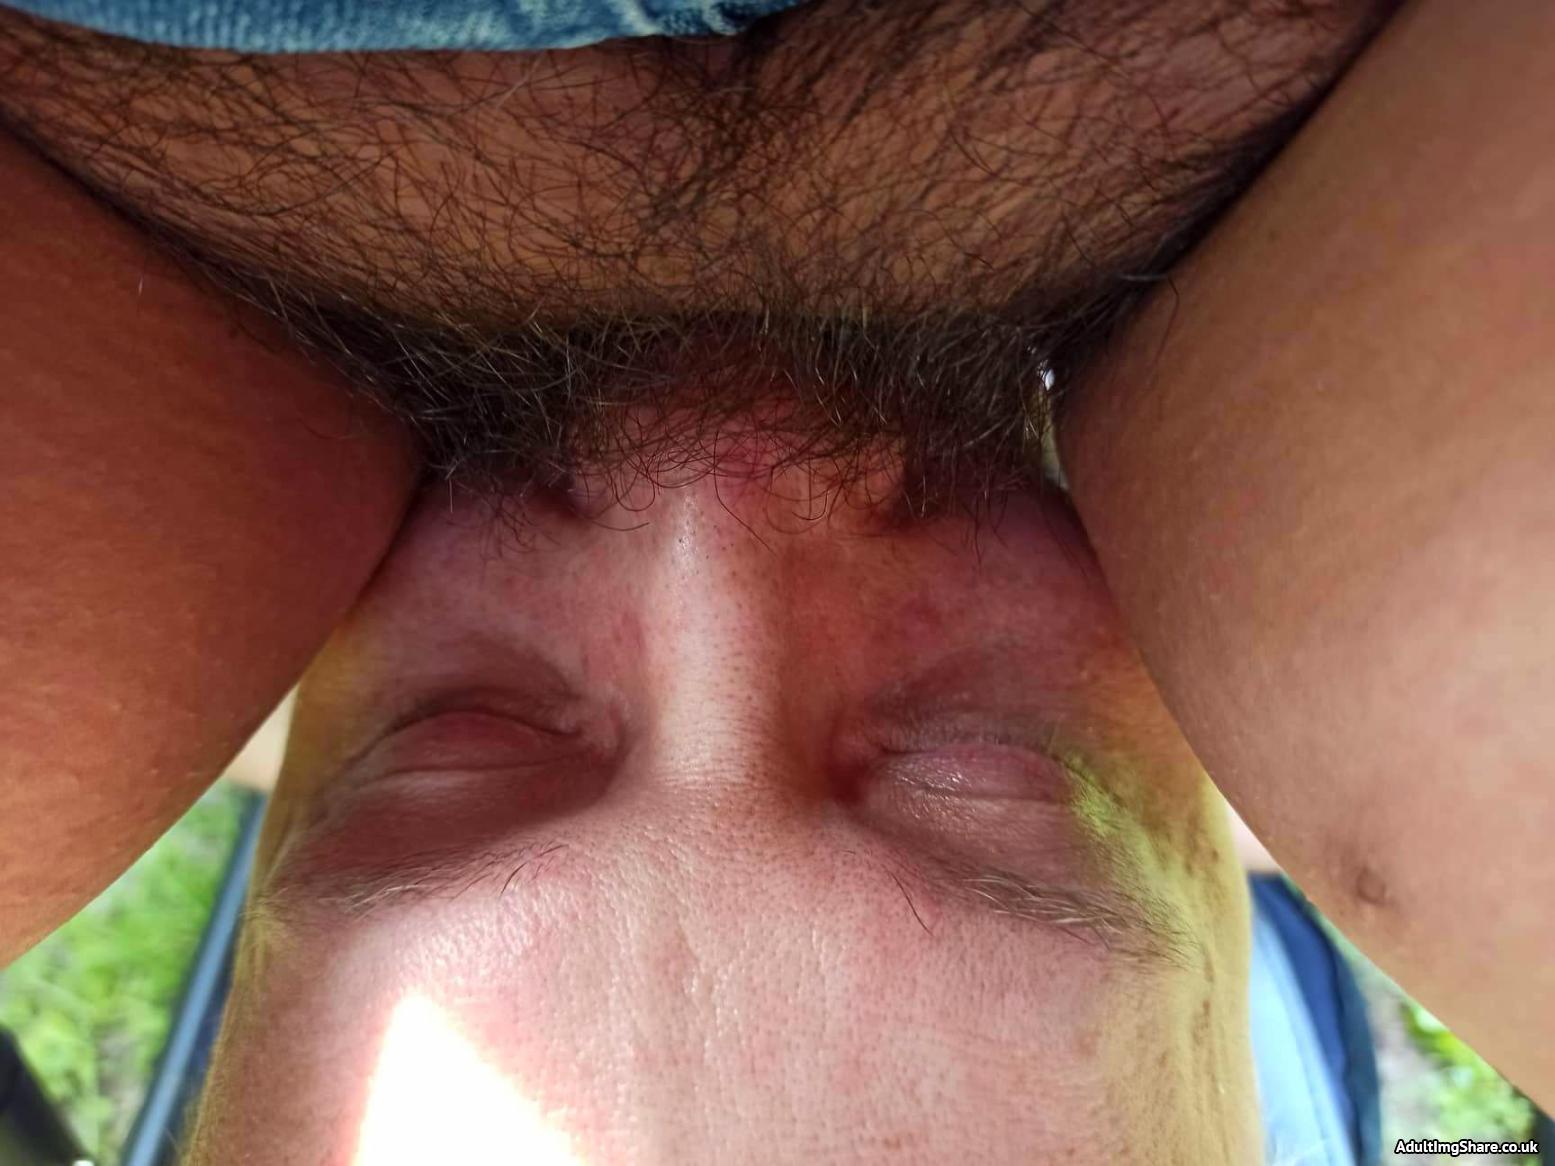 Full bush in the mouth while harvesting cunt juice. professional cunt juicer